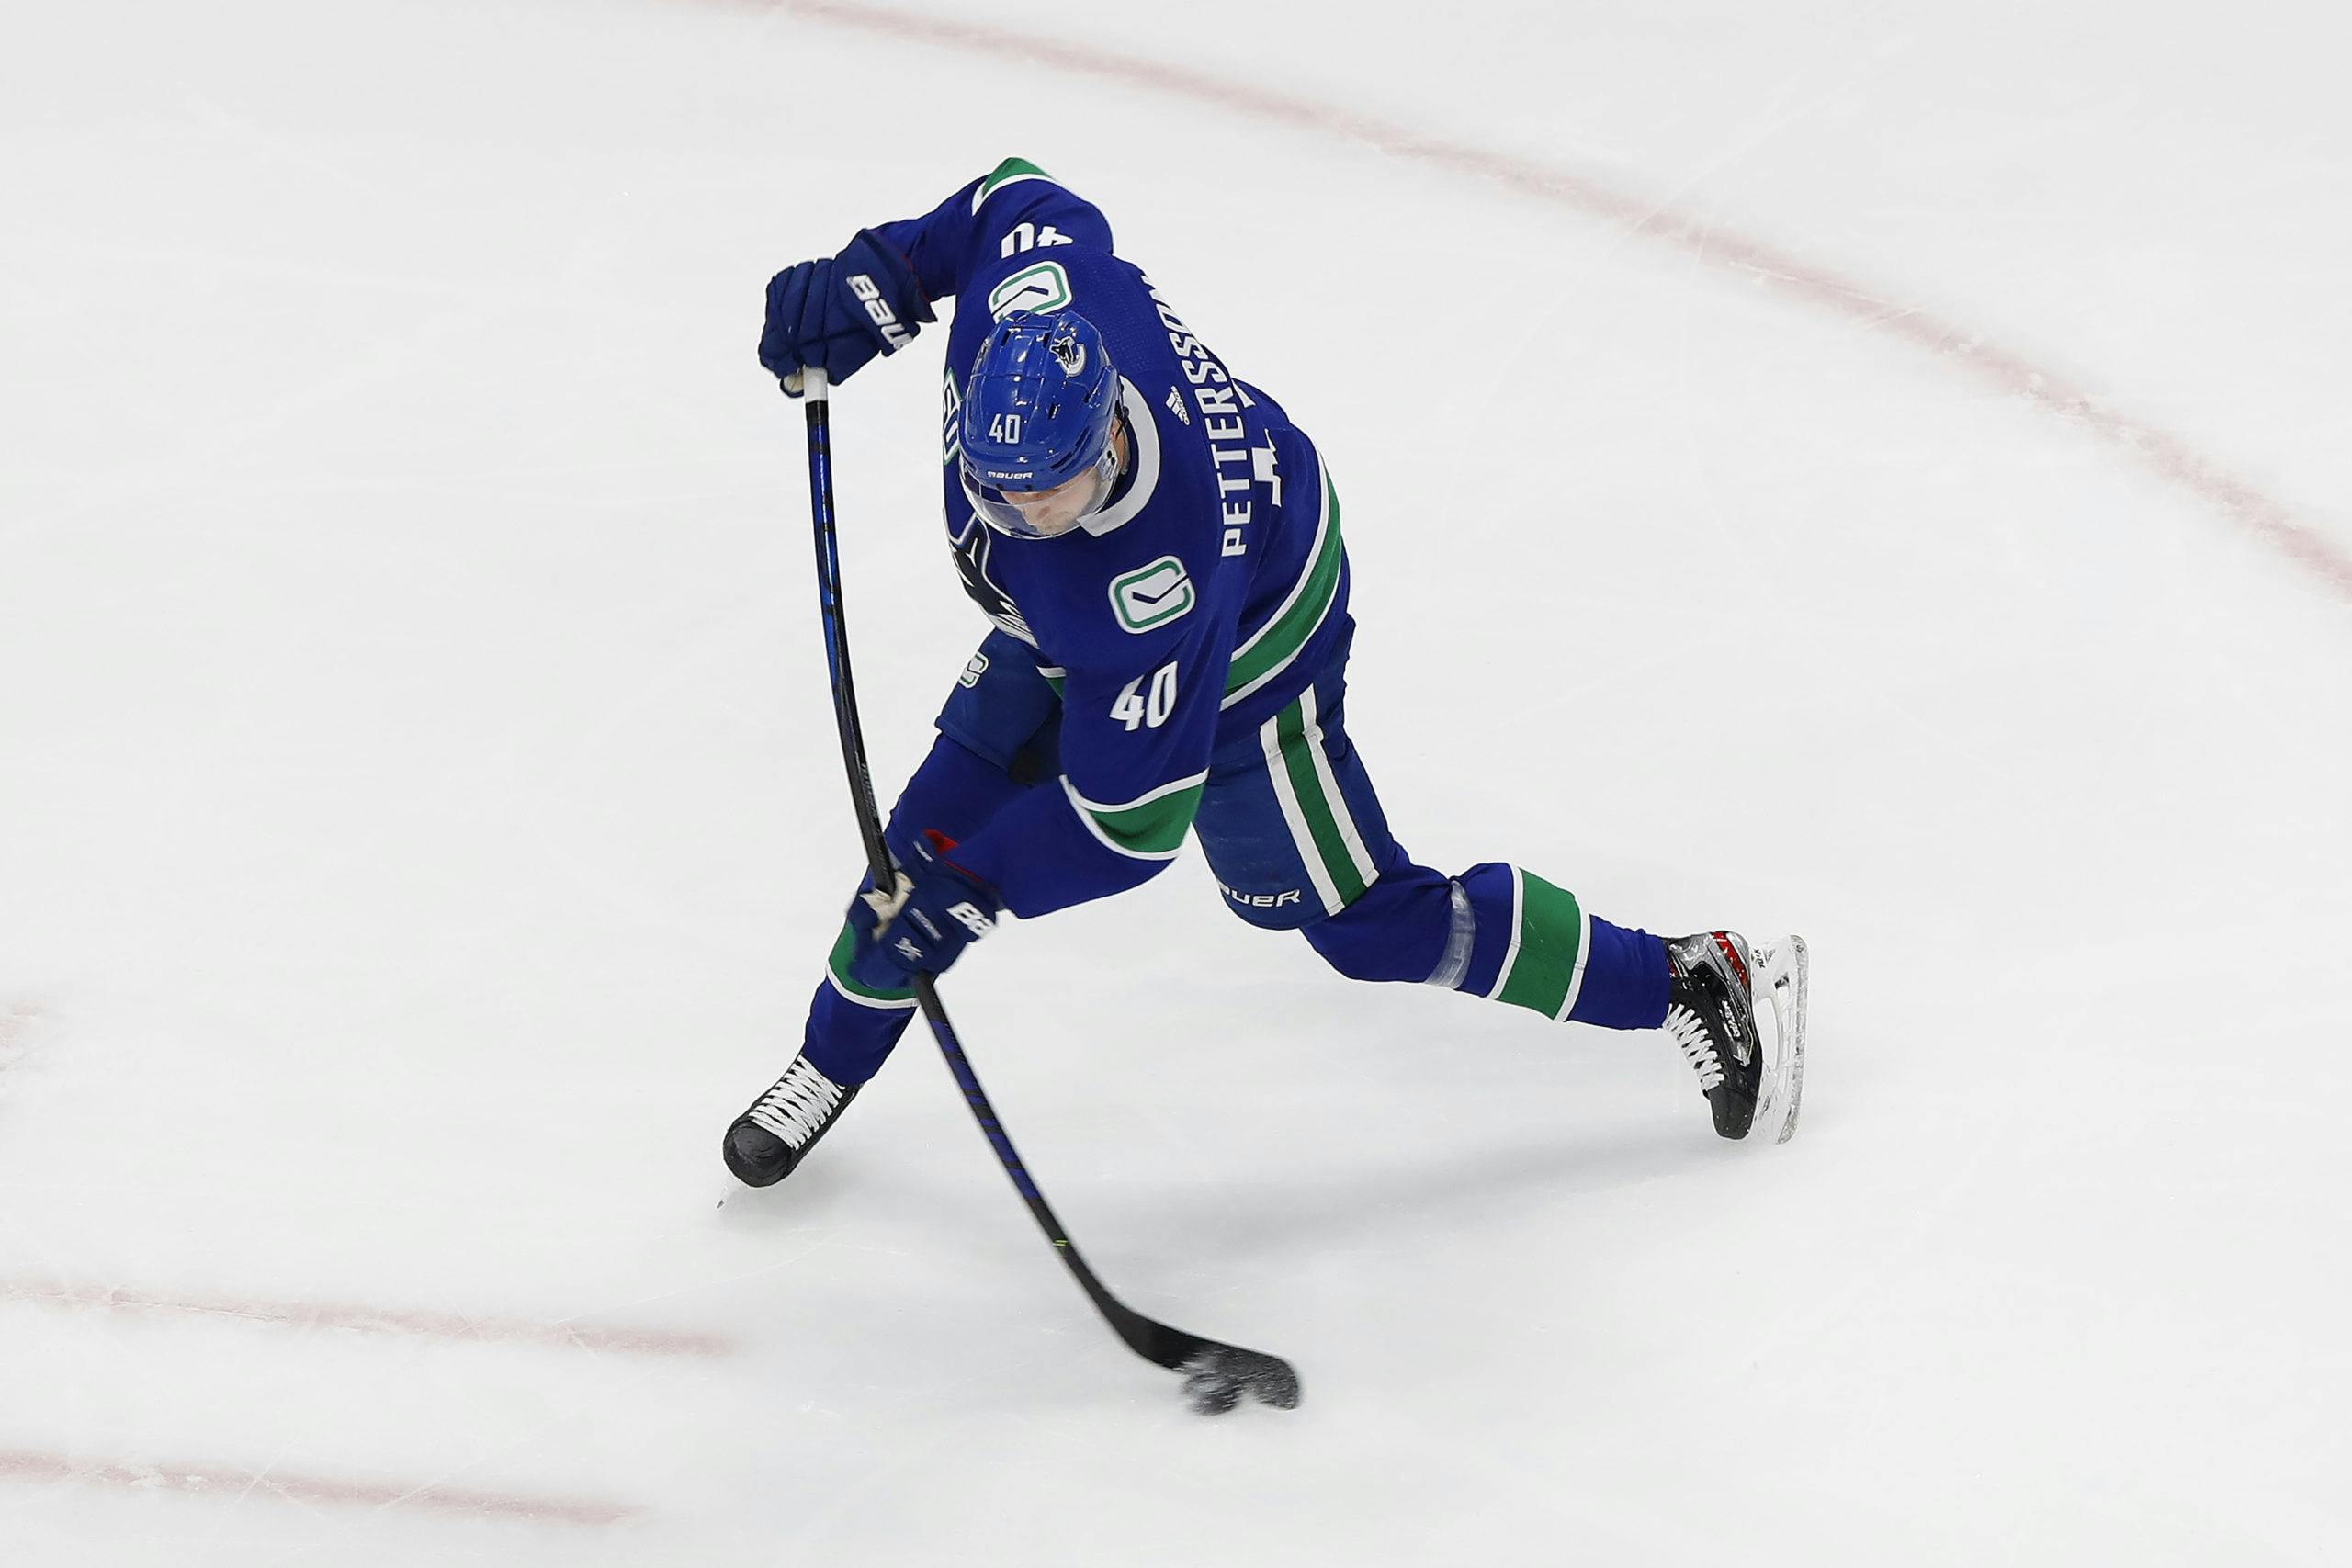 An announcement has been made involving Elias Pettersson